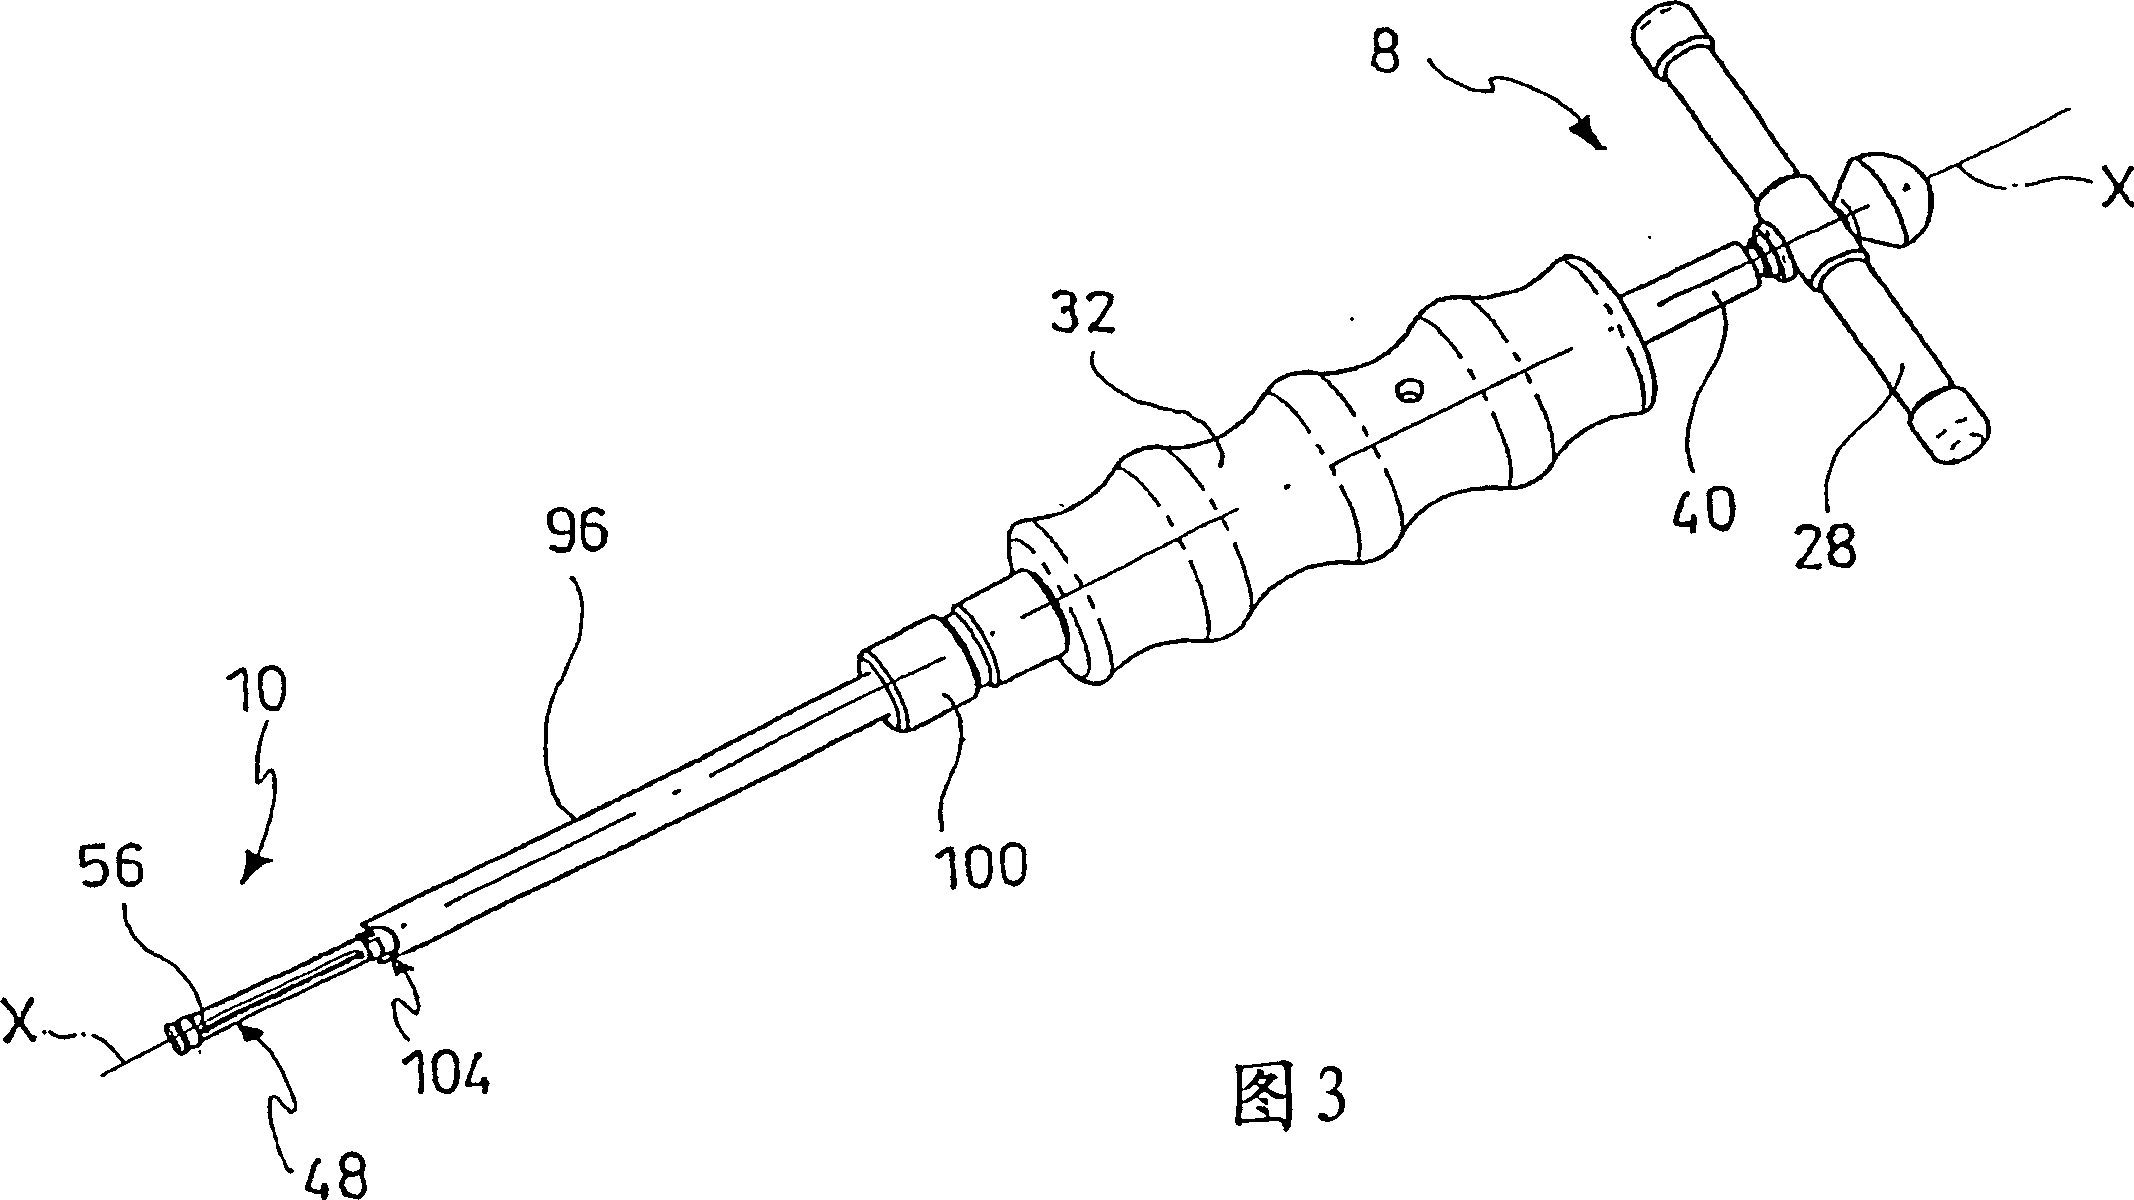 Intravertebral widening device, injection device, and kit and method for kyphoplasty